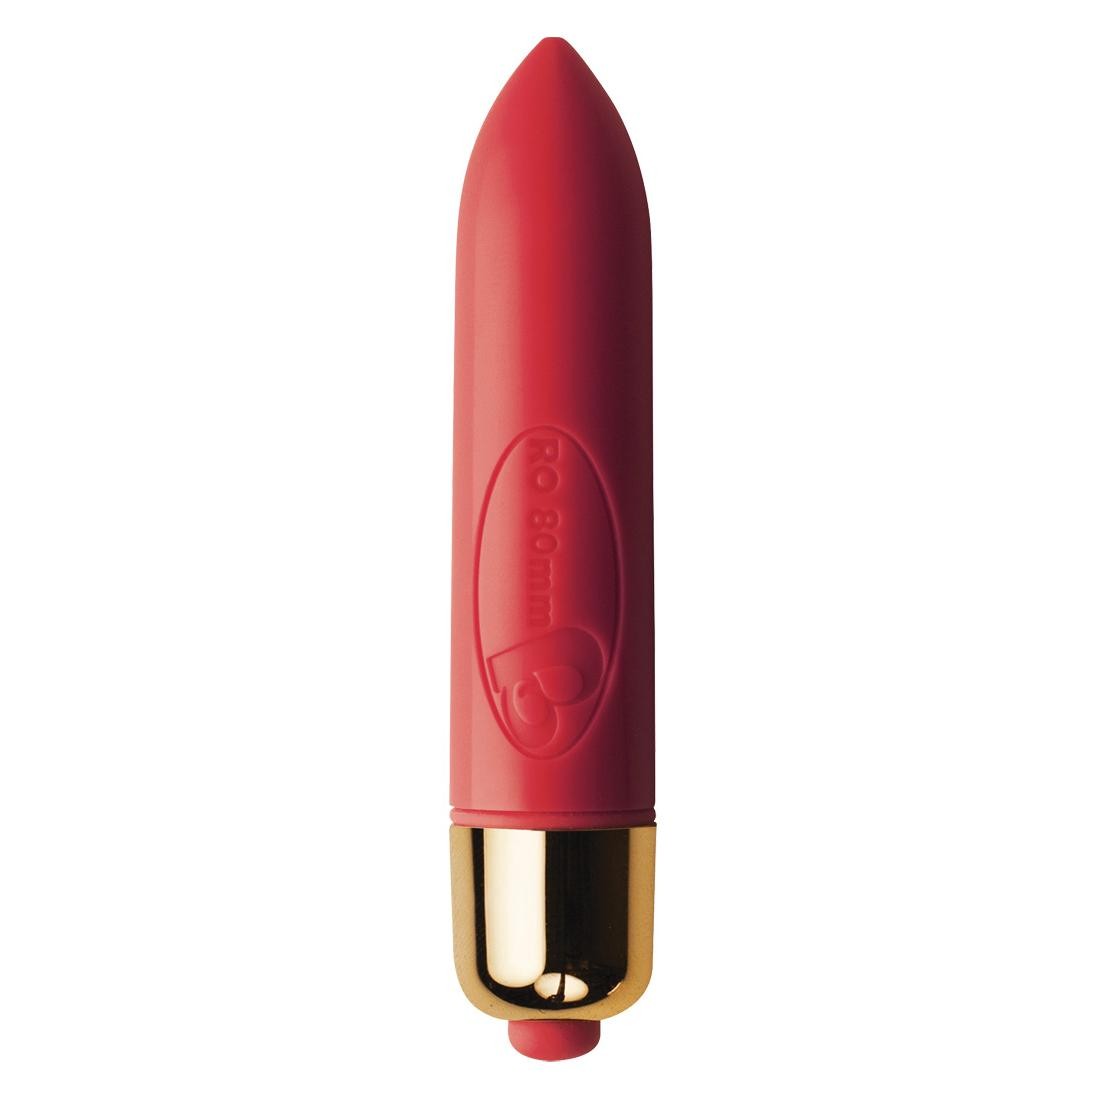  Rocks  Off  -  Carded  7  Speed  Red  -  Vibrator 